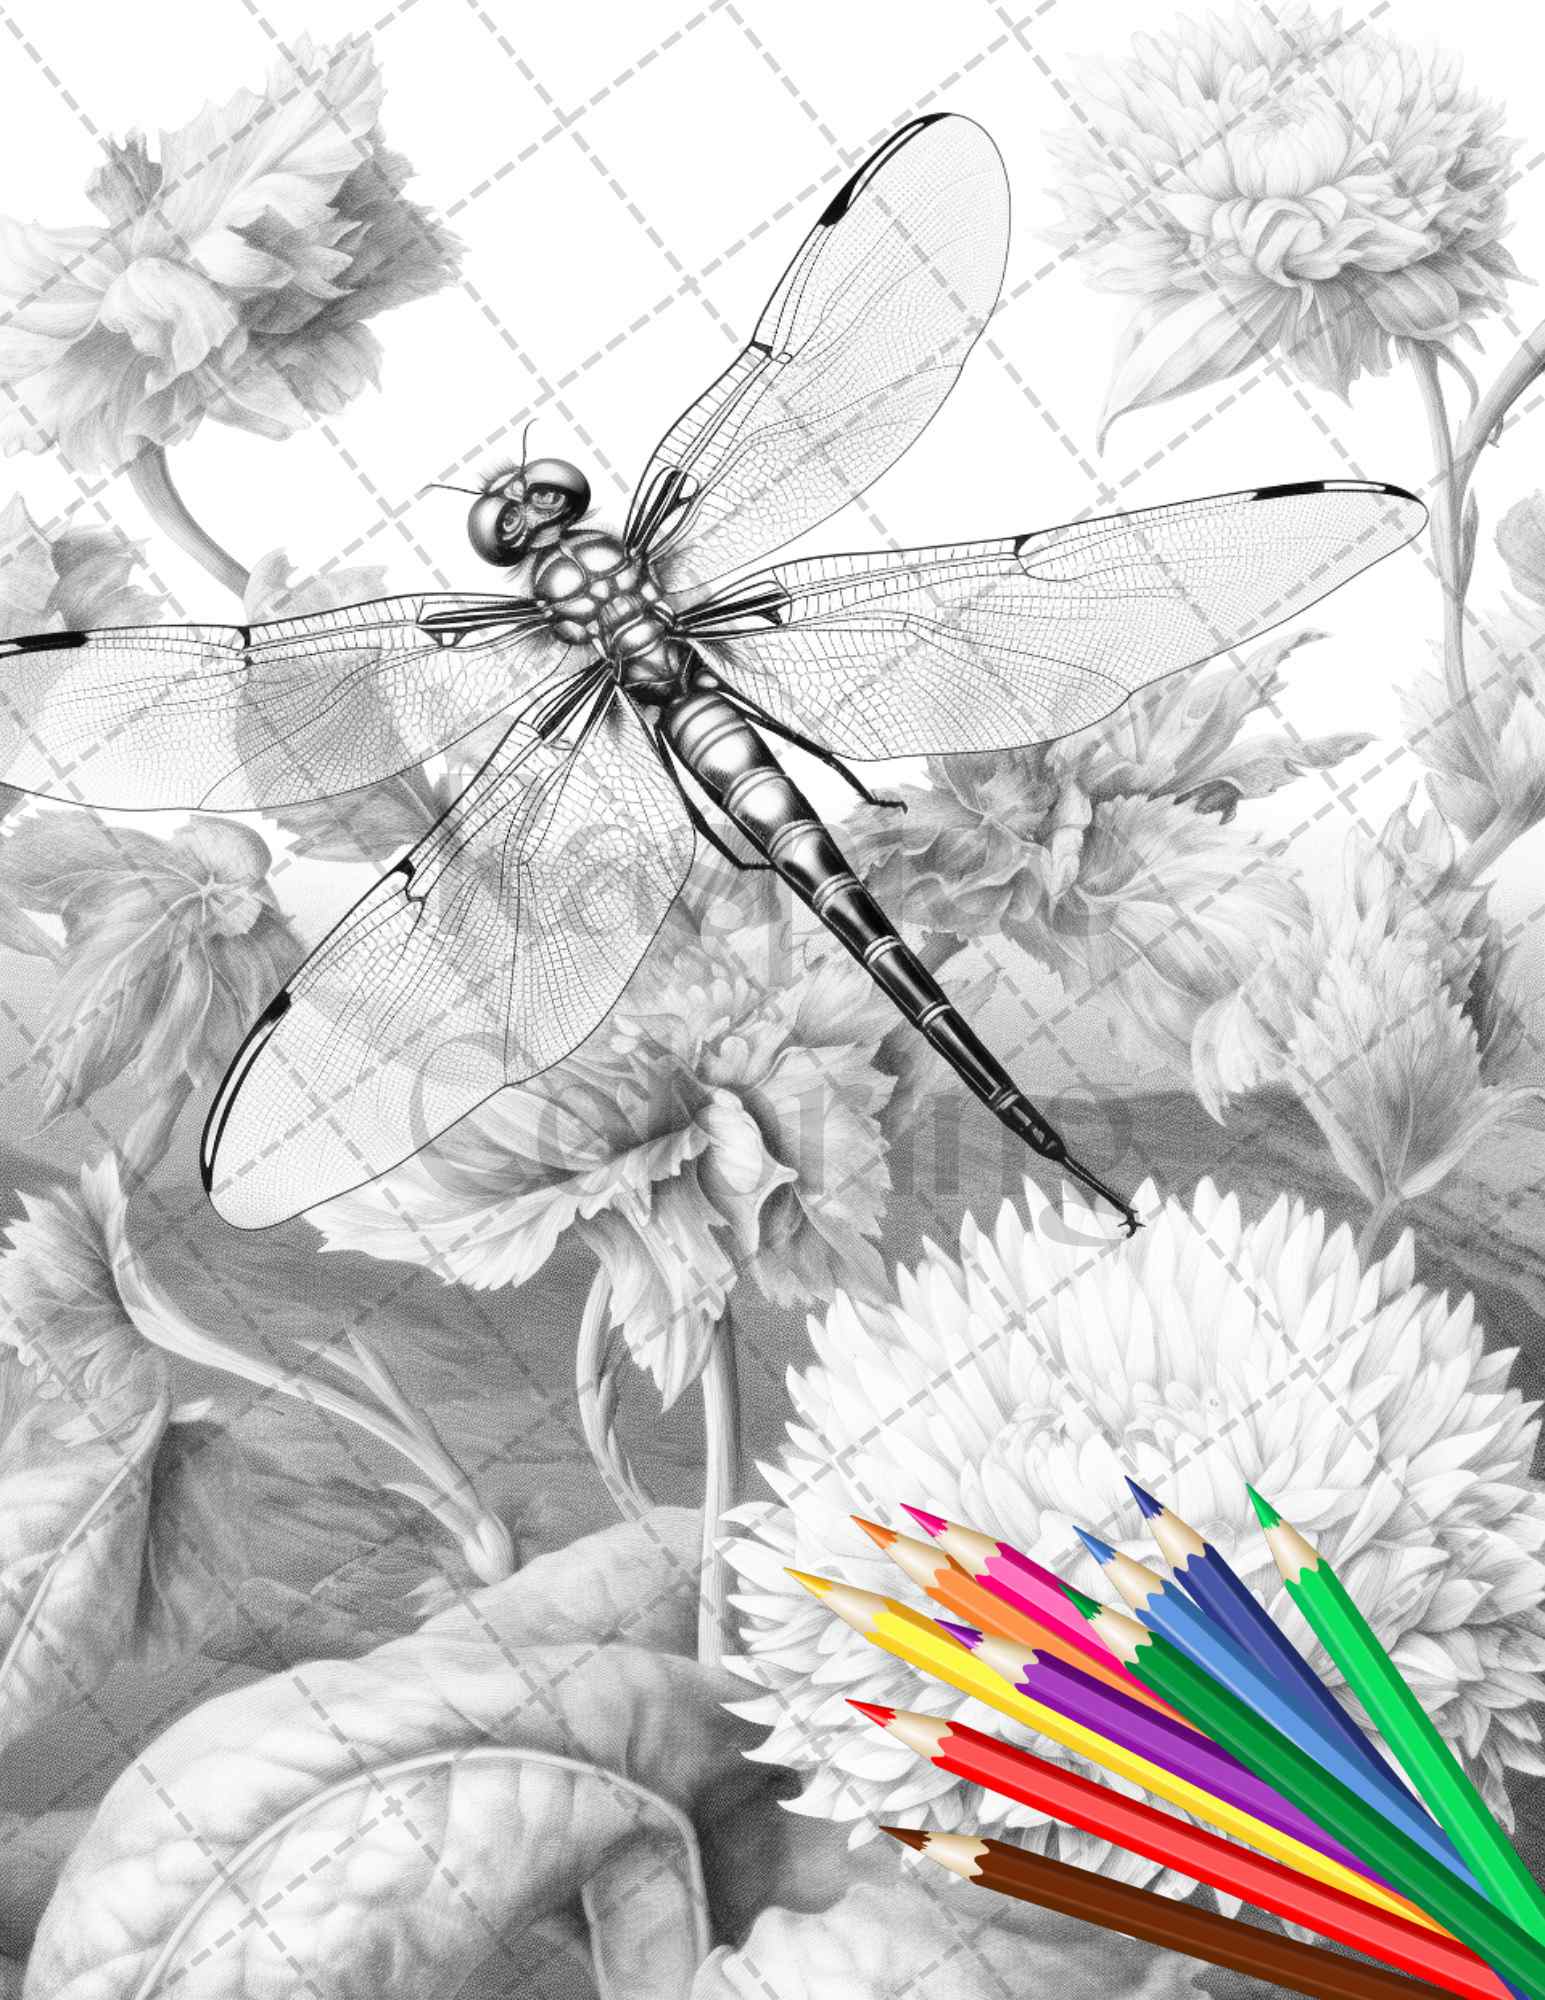 Vintage Botanical Dragonfly Grayscale Coloring Pages Printable for Adults, PDF File Instant Download - raspiee